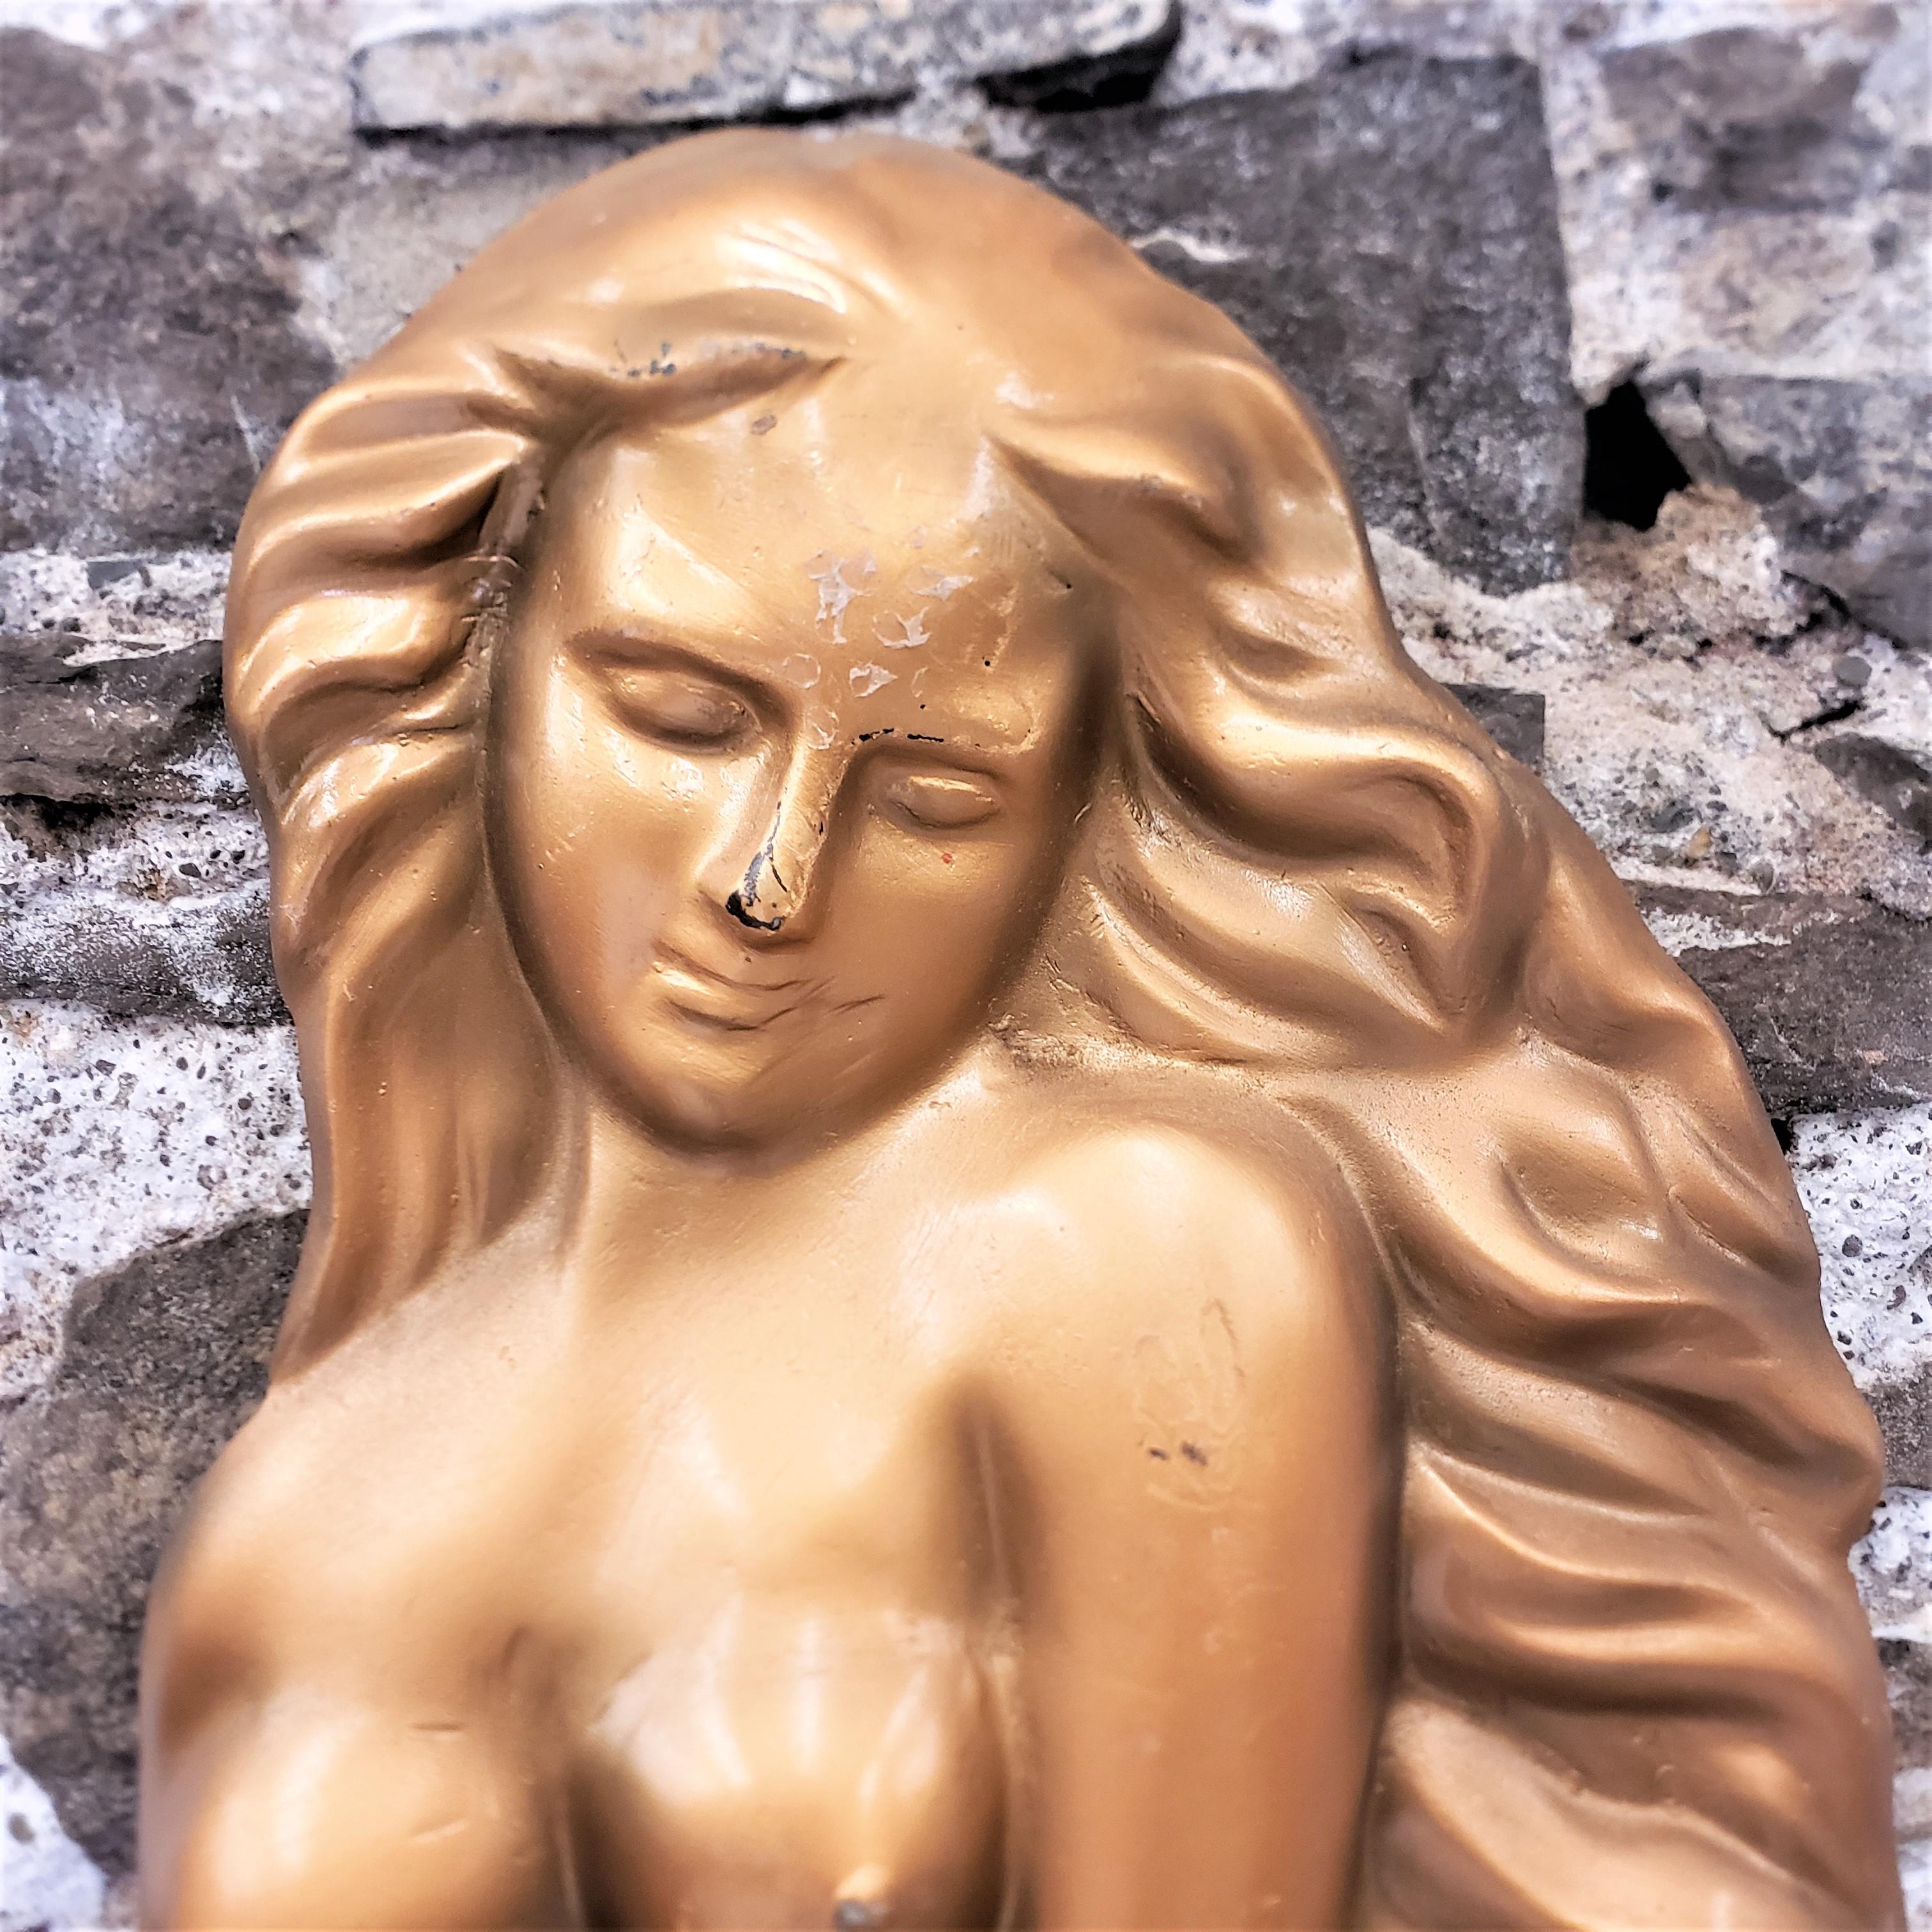 Canadian Large Vintage Molded Semi-Nude Neoclassical Styled Female Relief Wall Sculpture For Sale